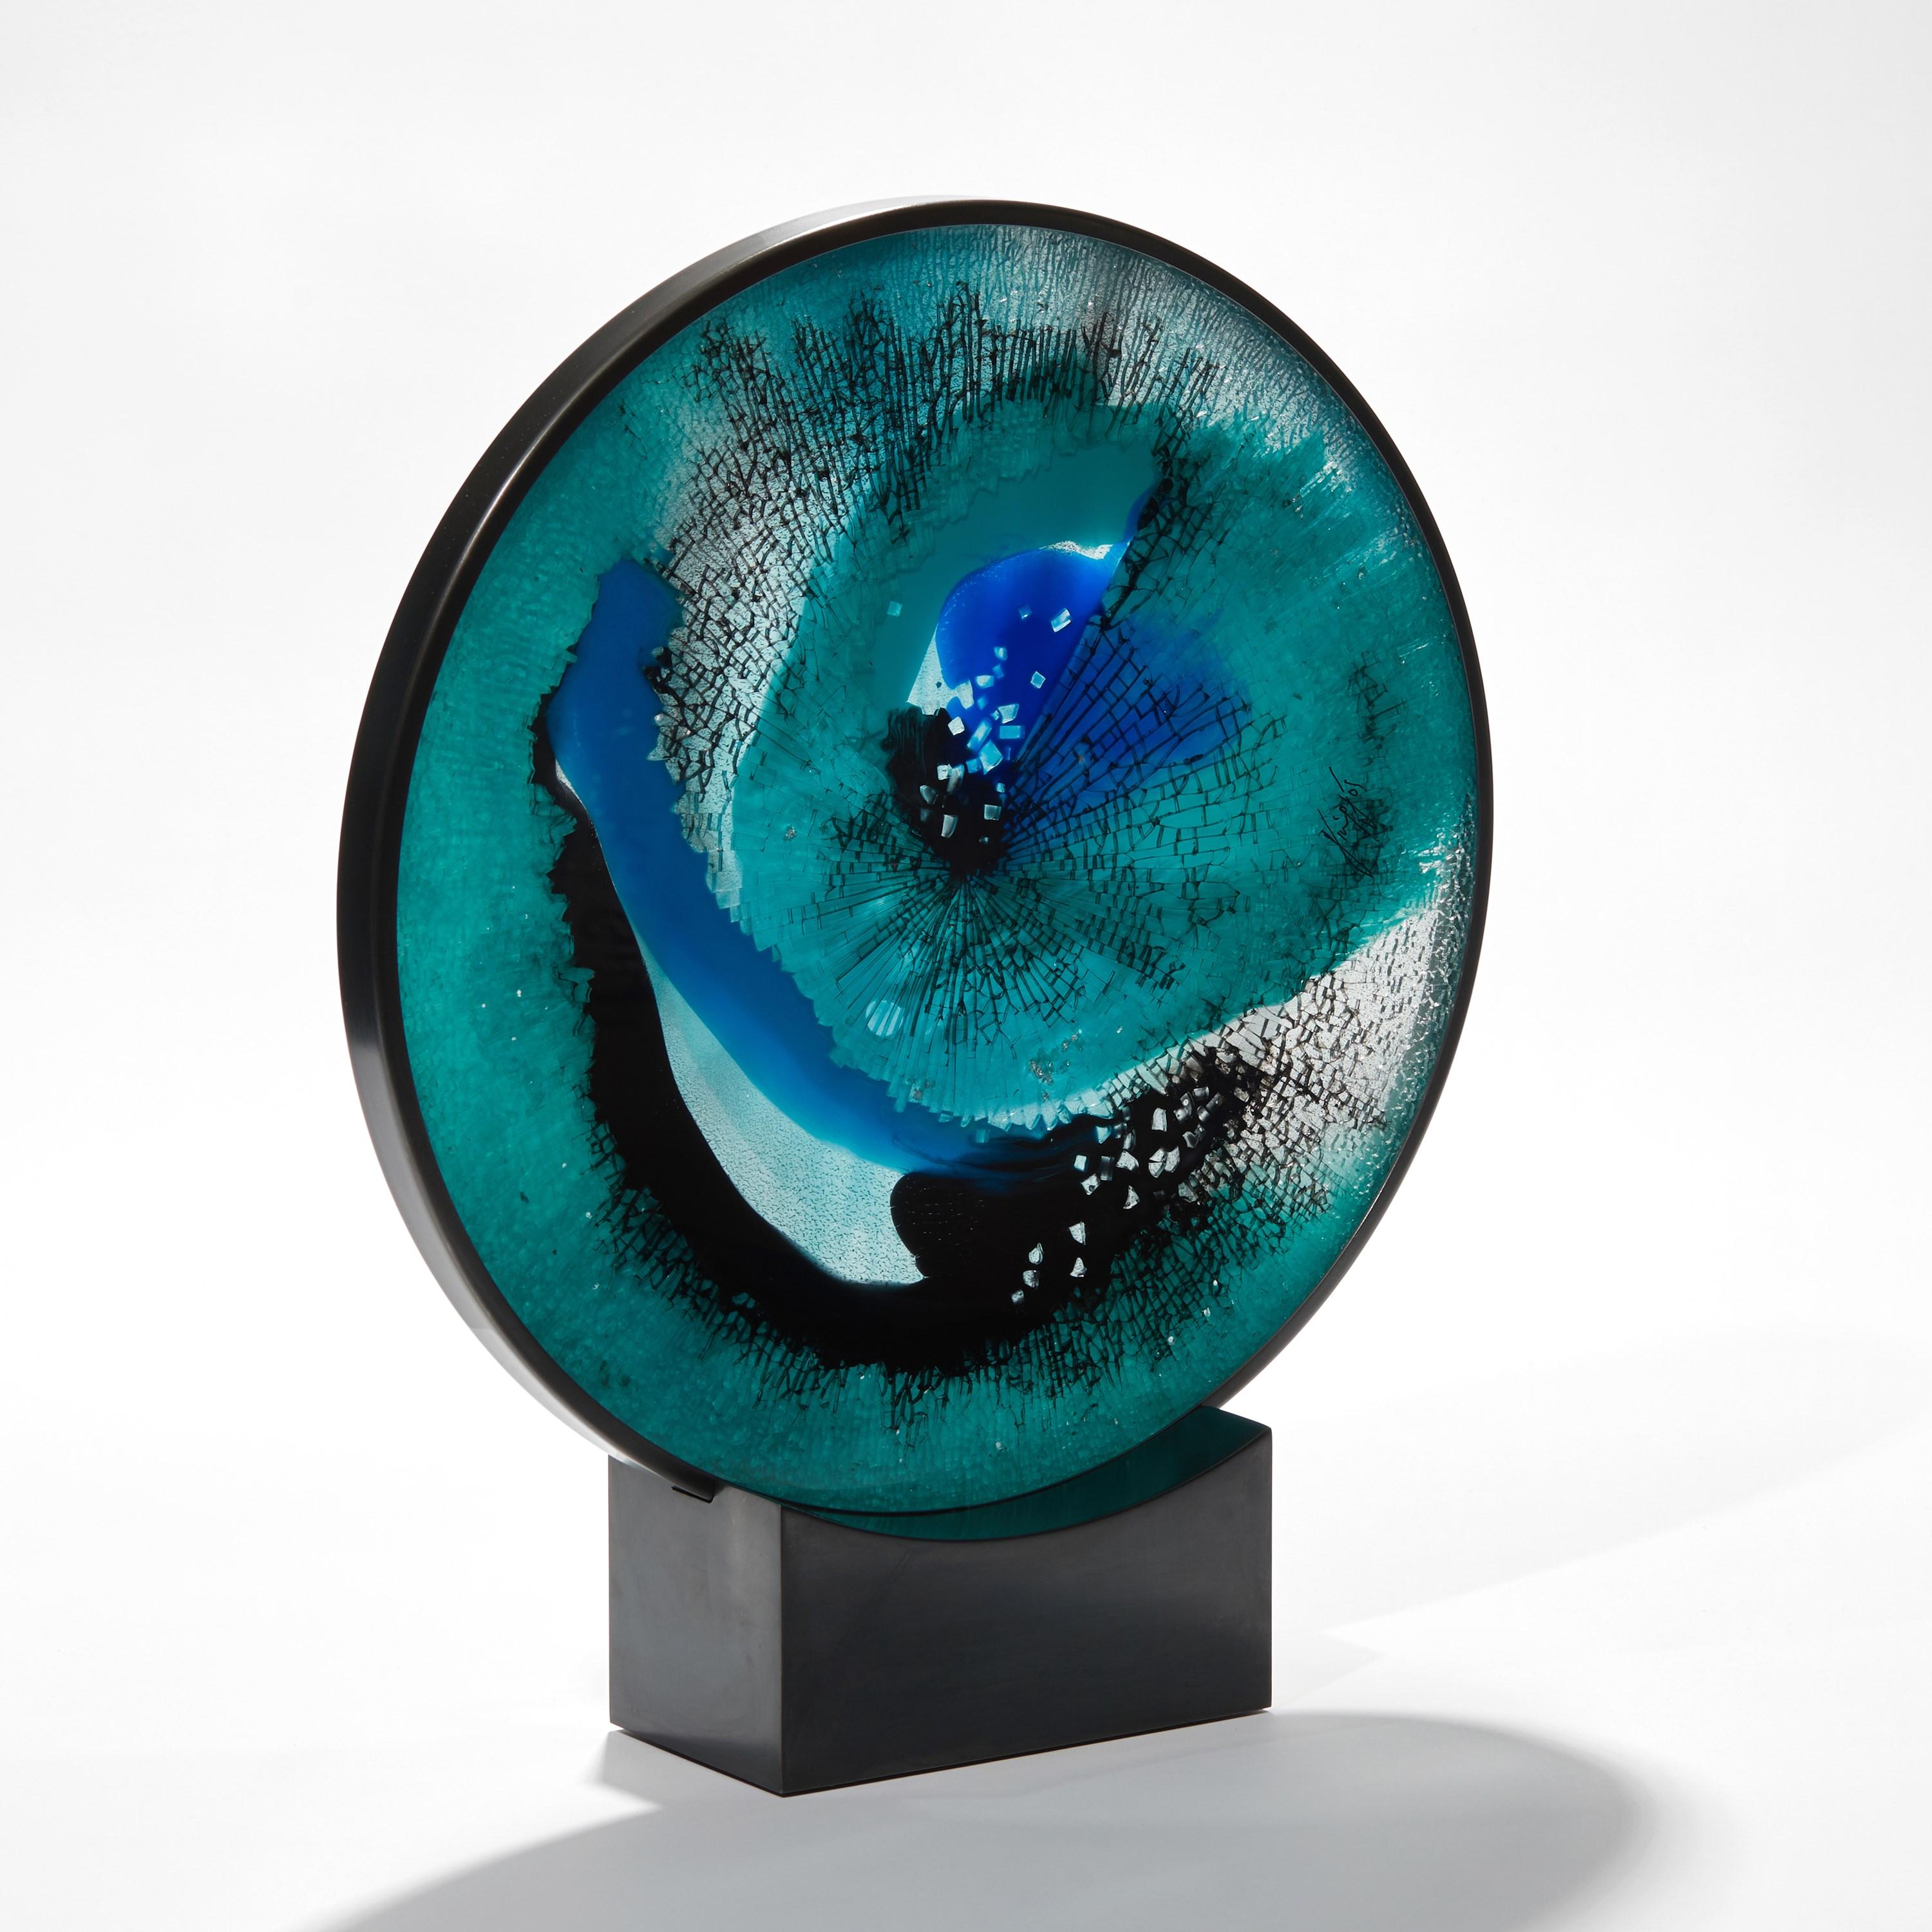 Organic Modern Eye of Discovery, a Blue & Black Abstract Glass Artwork by Yorgos Papadopoulos For Sale